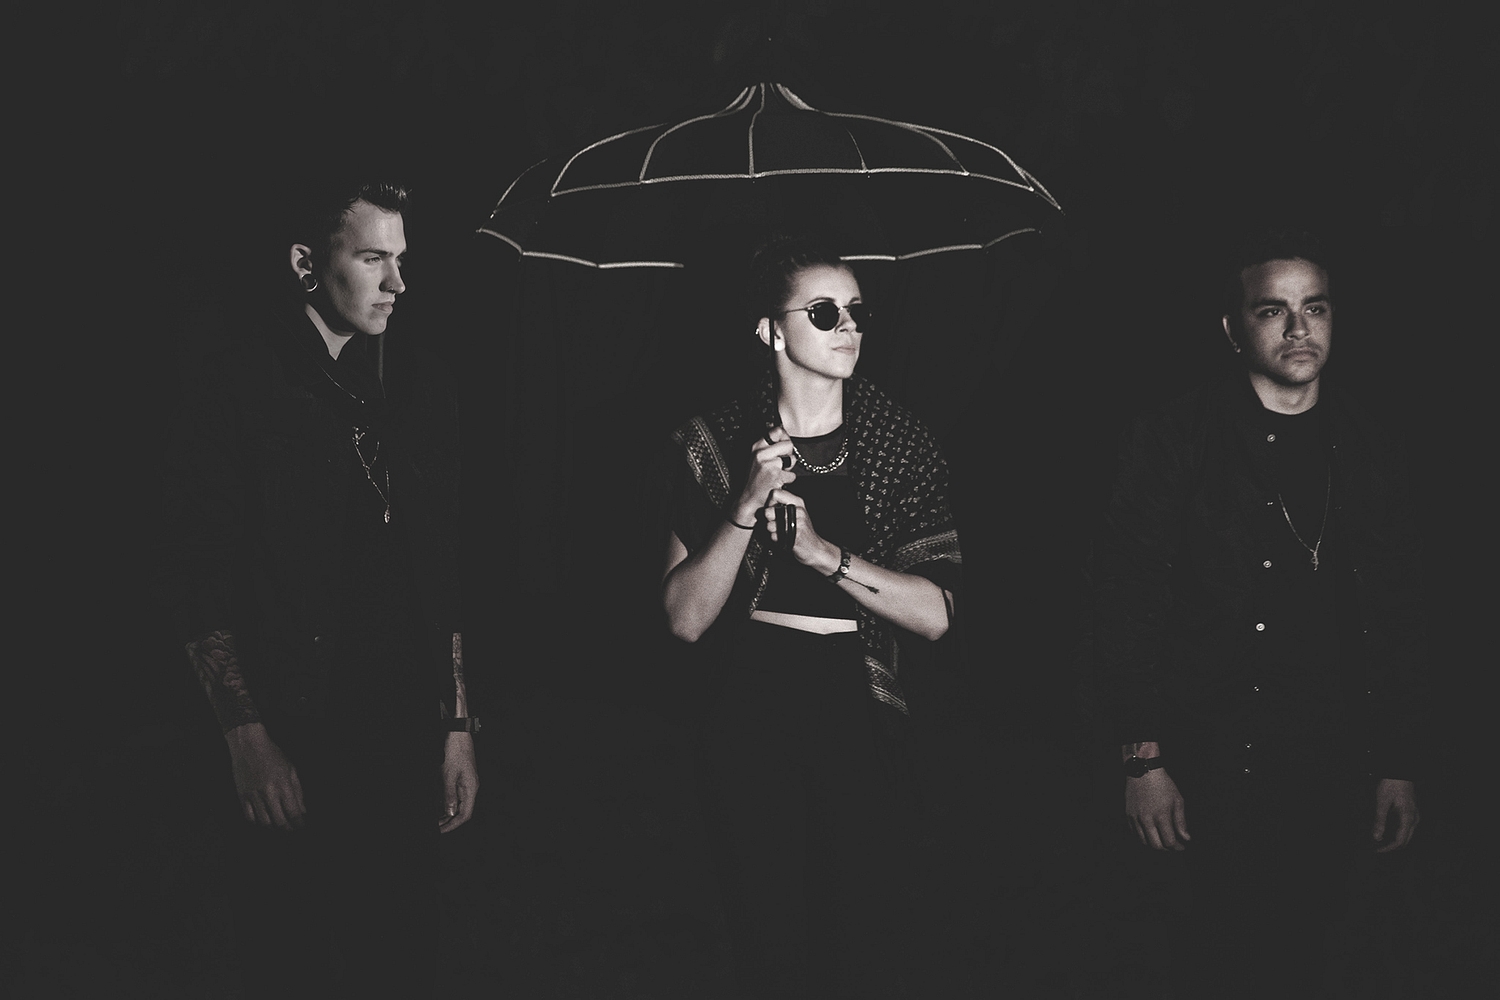 PVRIS: "Not to get ahead of ourselves, but we want to be one of the biggest bands ever"